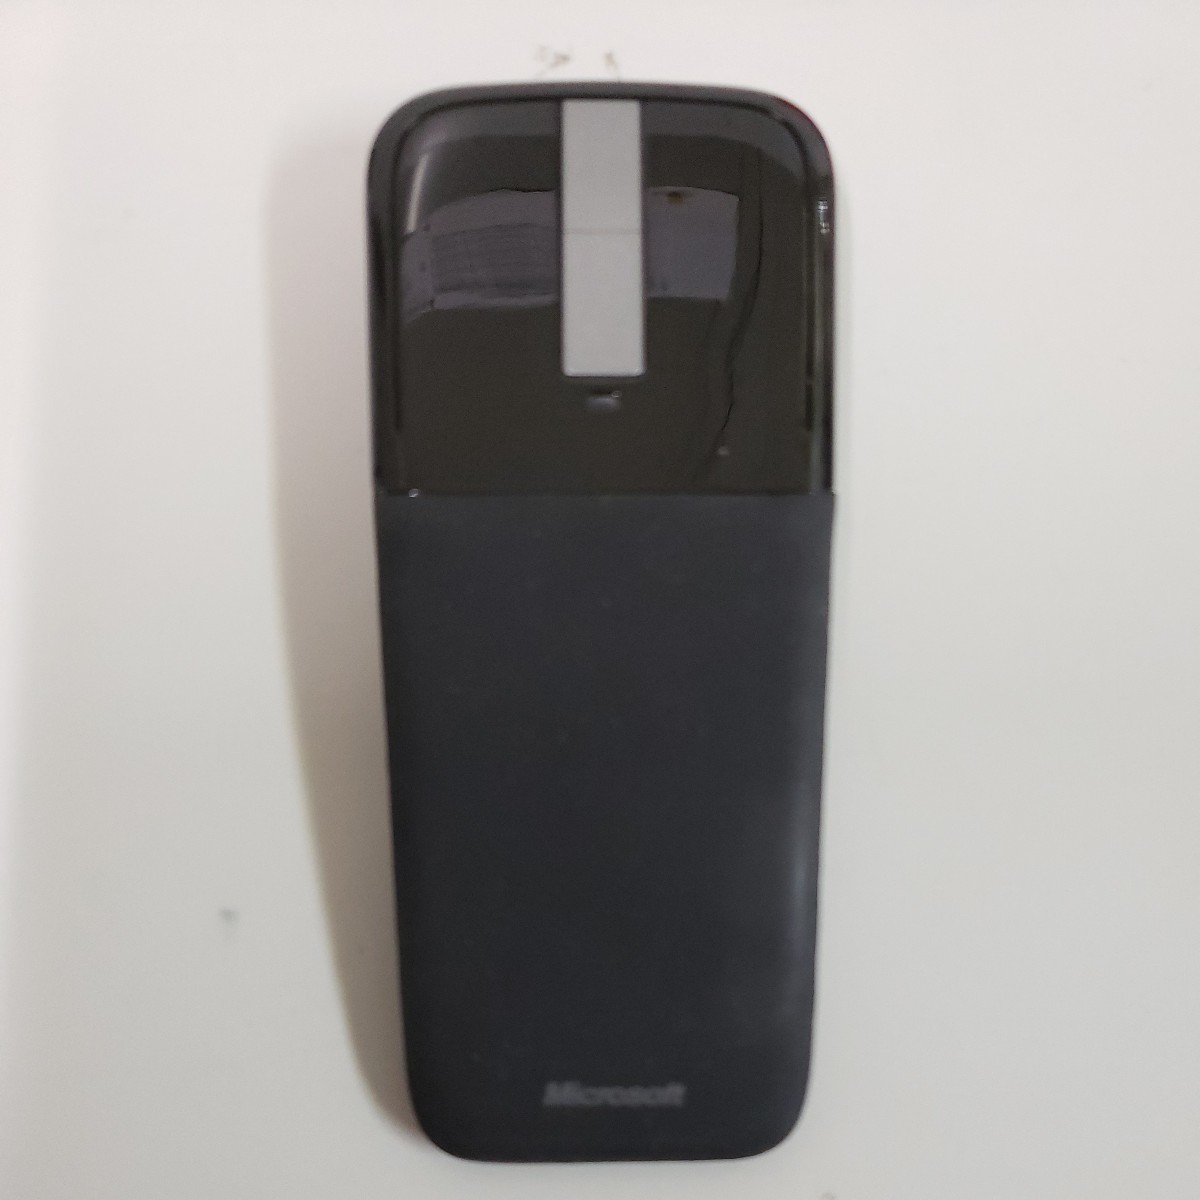 512y0416* Microsoft blue truck wireless mouse Arc Touch Mouse black RVF-00052